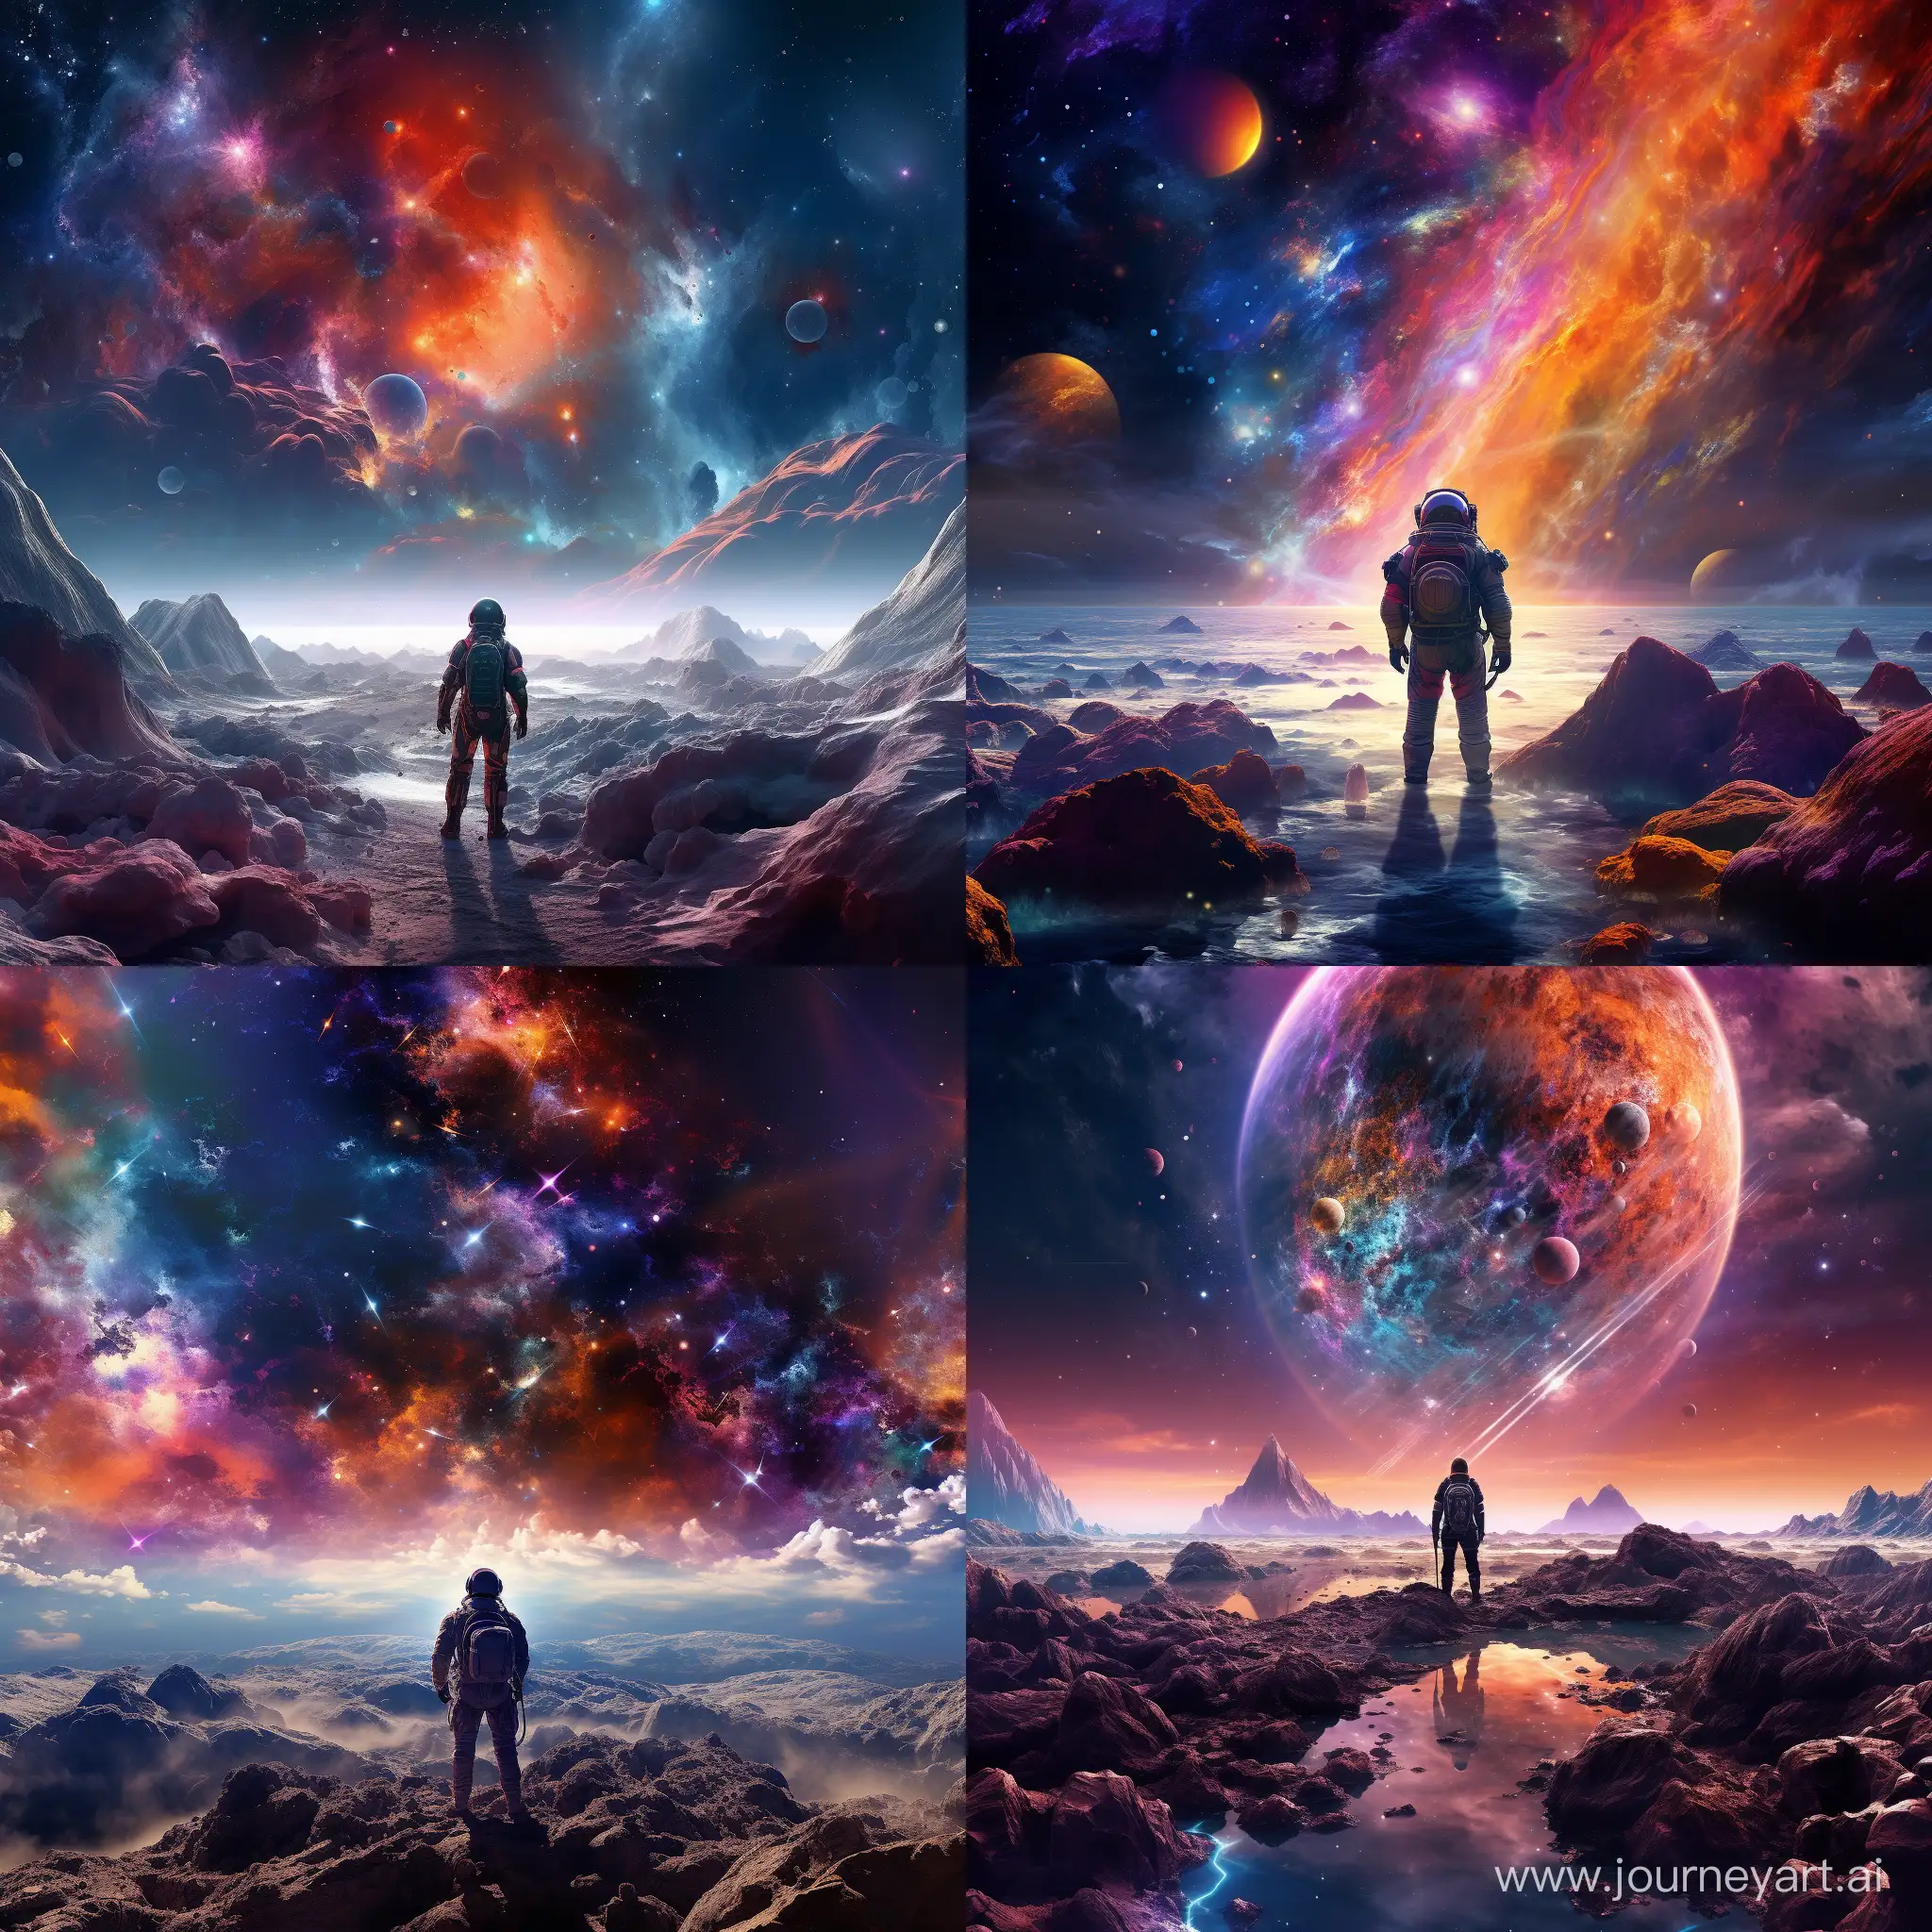 An astronaut, alone, exploring a hyper-realistic galaxy. The scene depicts the astronaut navigating through the vastness of space, surrounded by breathtaking celestial formations and vibrant cosmic colors. The hyper-realistic details bring an immersive and awe-inspiring quality to the image, capturing the solitude and wonder of space exploration.